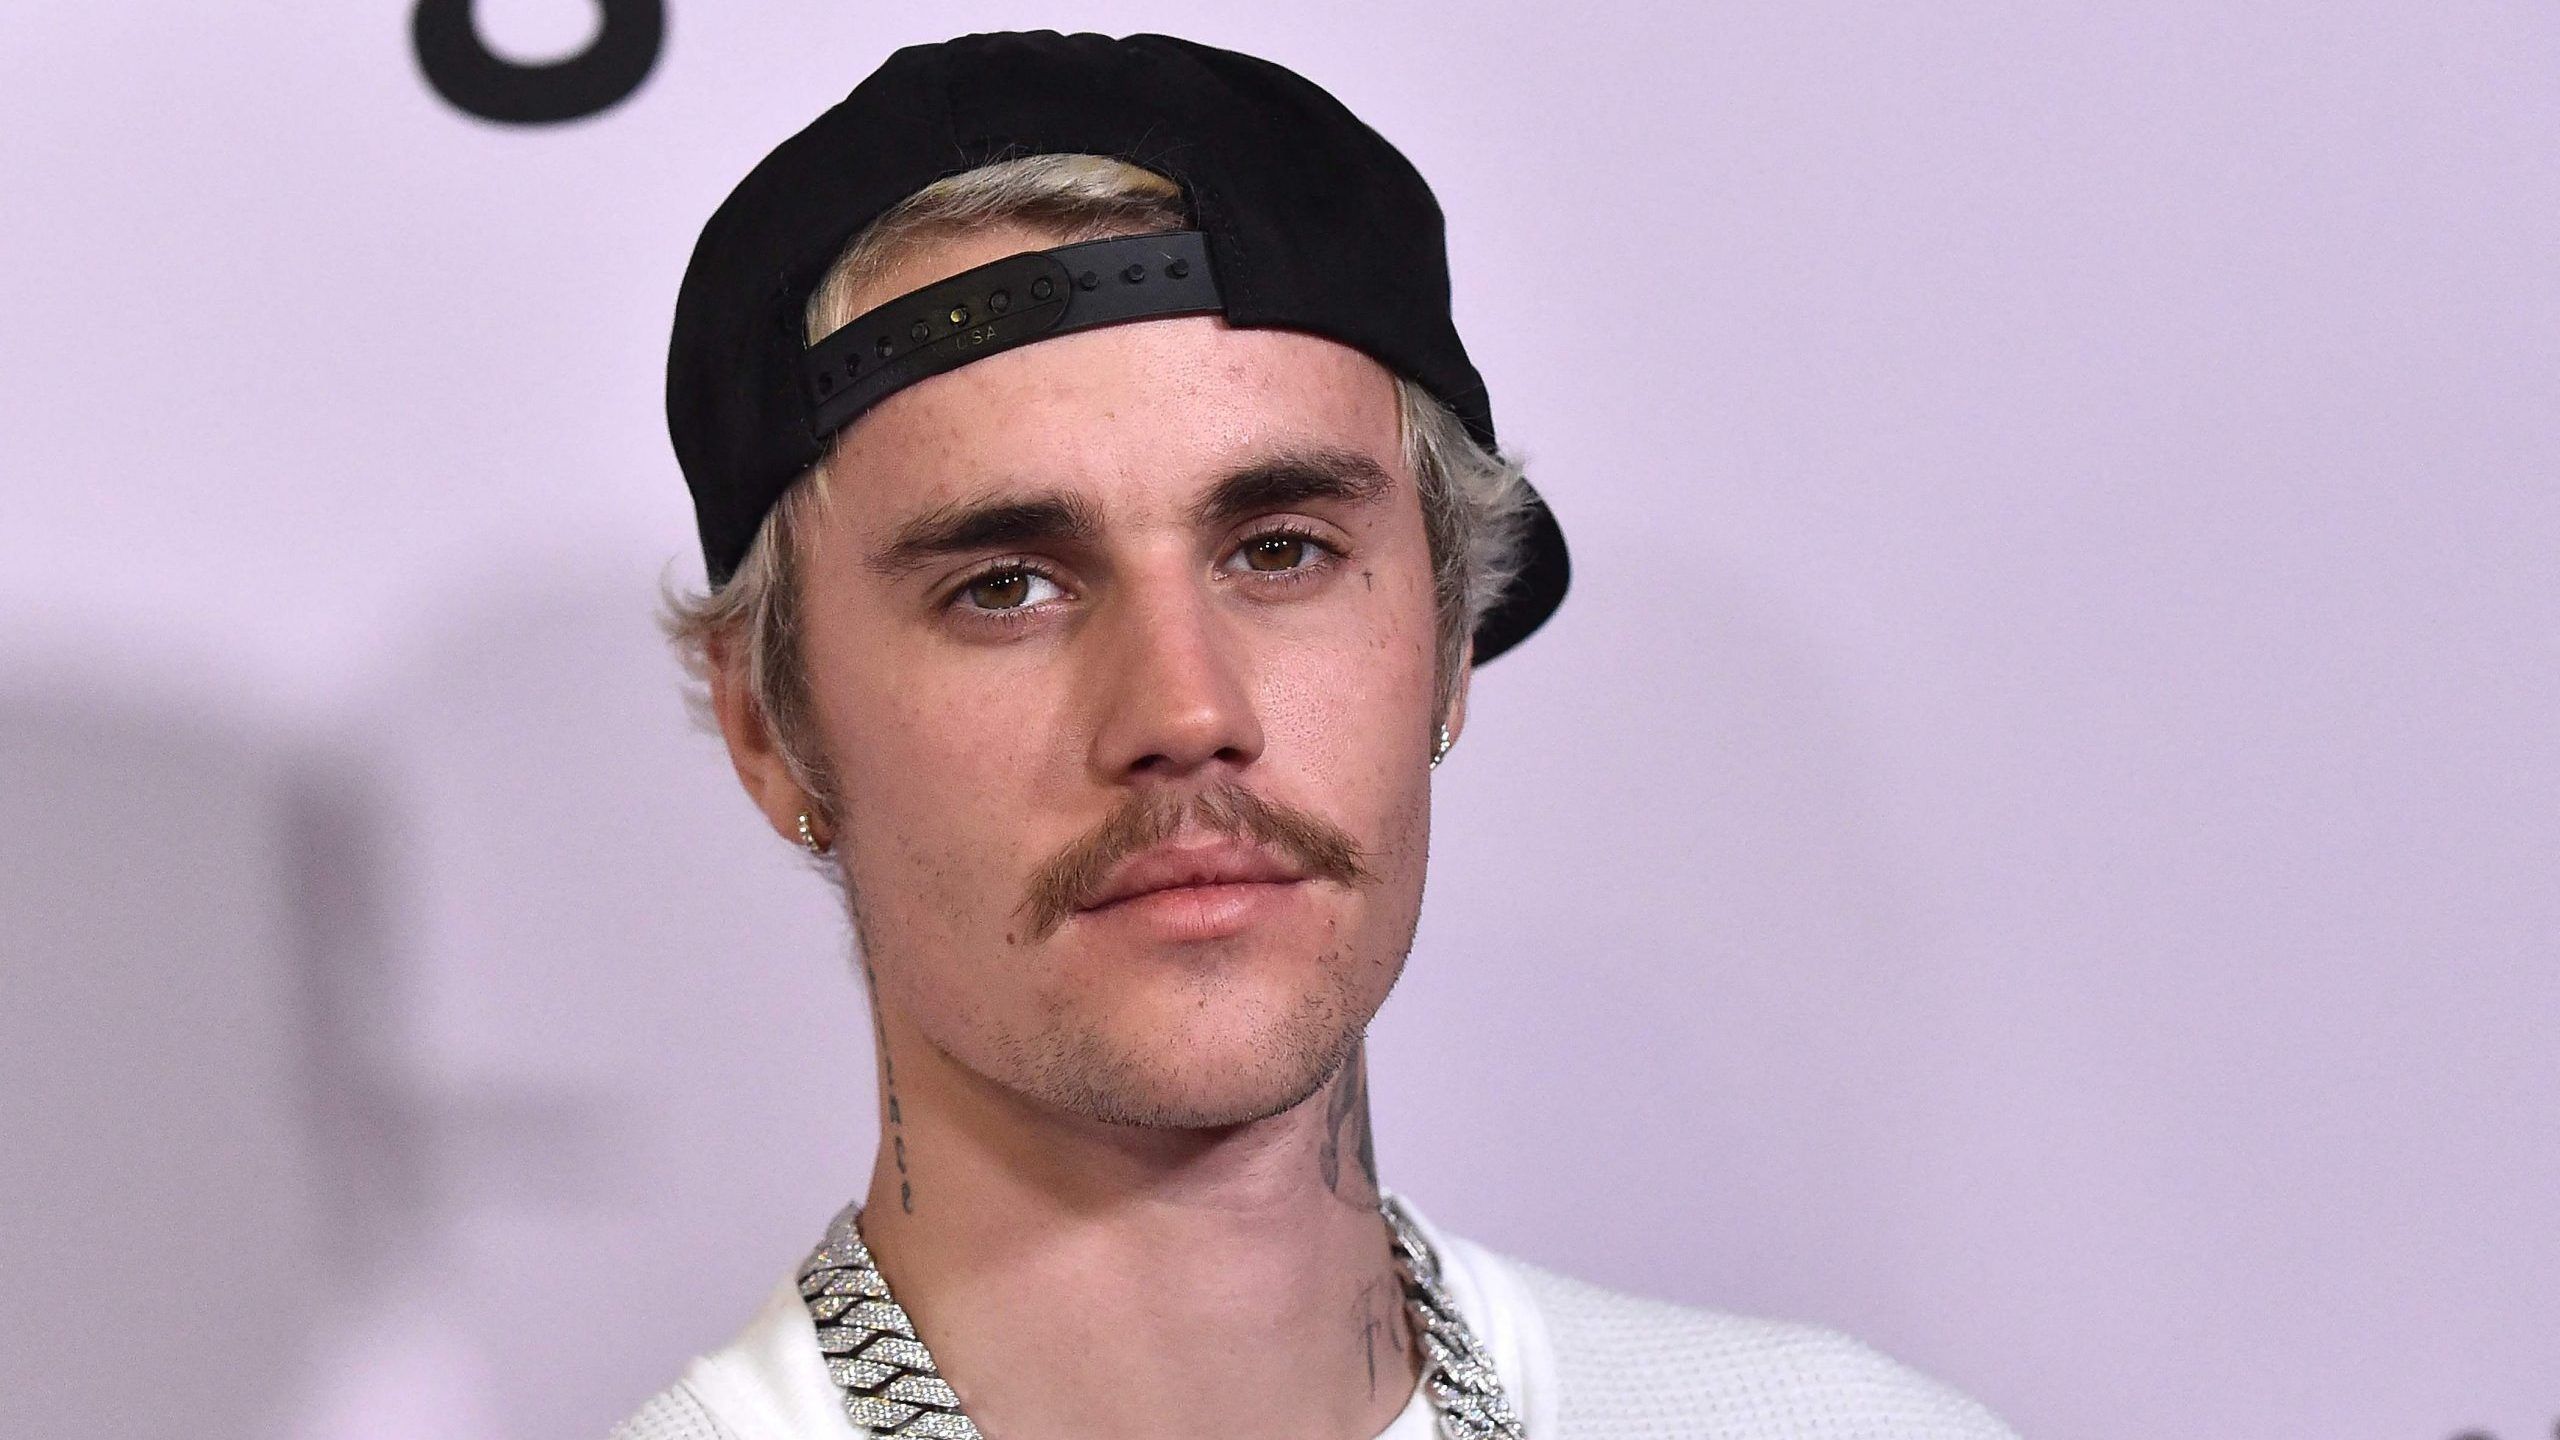 Justin Bieber 'did something very important for the facial difference community'